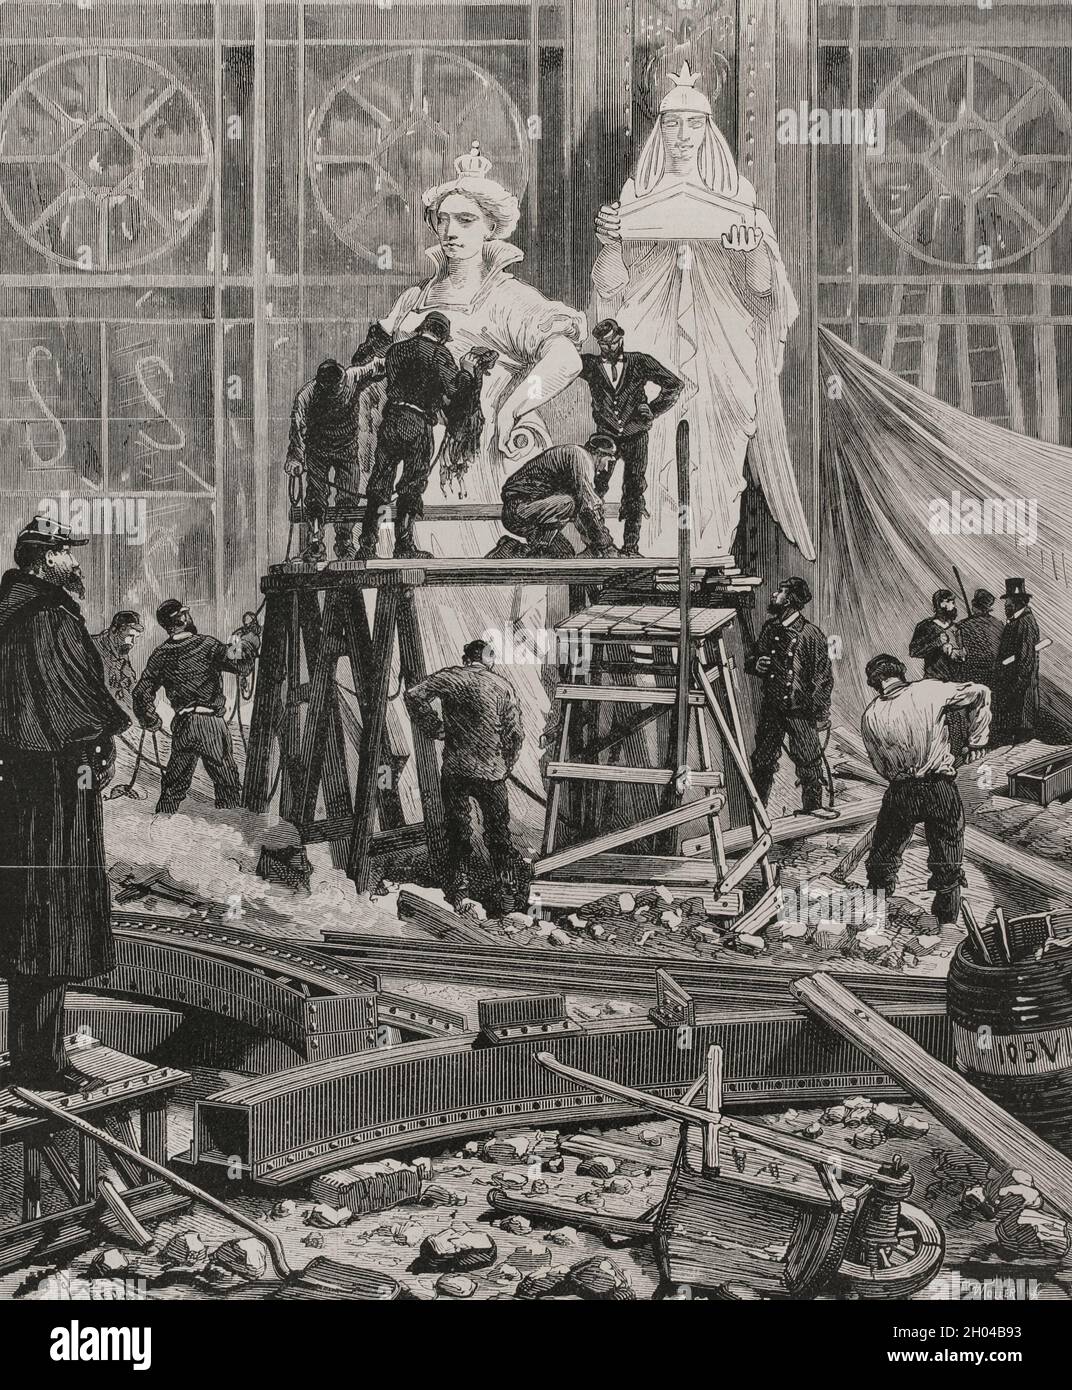 History of France. Paris. Universal Exhibition of 1878. It was held from May 1 to November 10, 1878. Final preparations for the placement of the allegorical statues on the facade of the Palace of Mars. Engraving. La Ilustración Española y Americana, 1878. Stock Photo